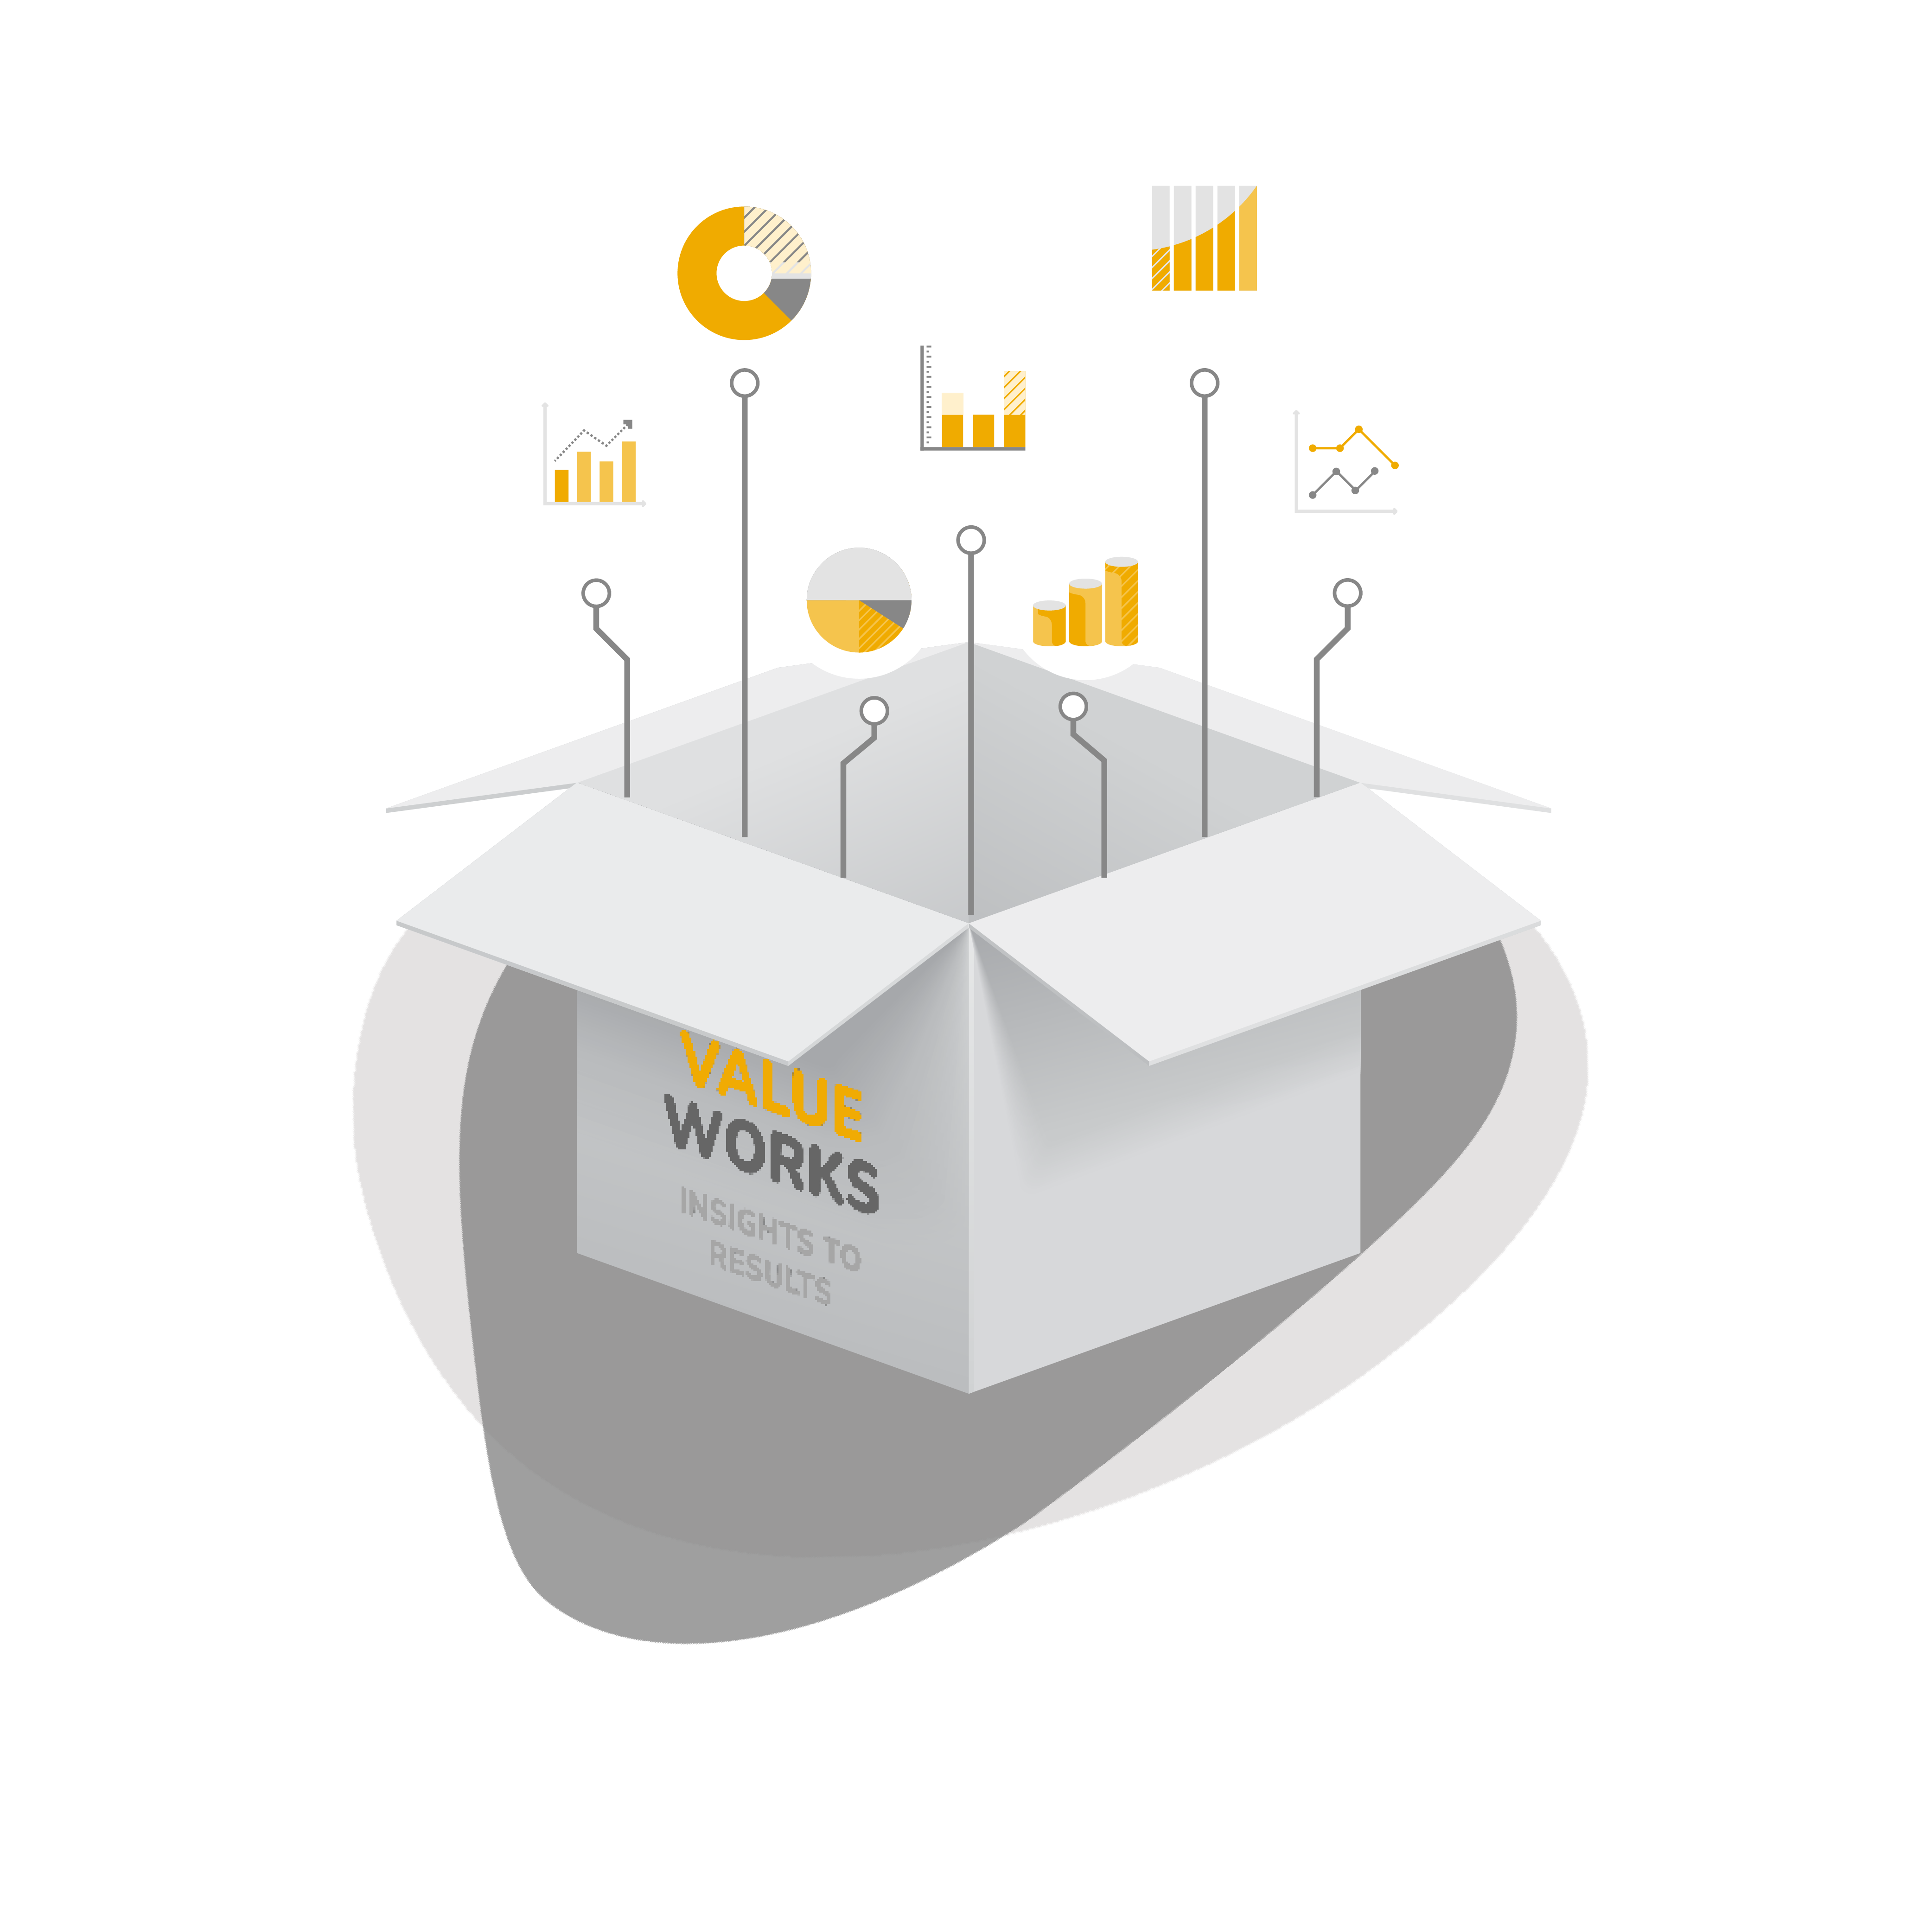 ValueWorks, Out of the Box Solution partnered with Fortius Partners